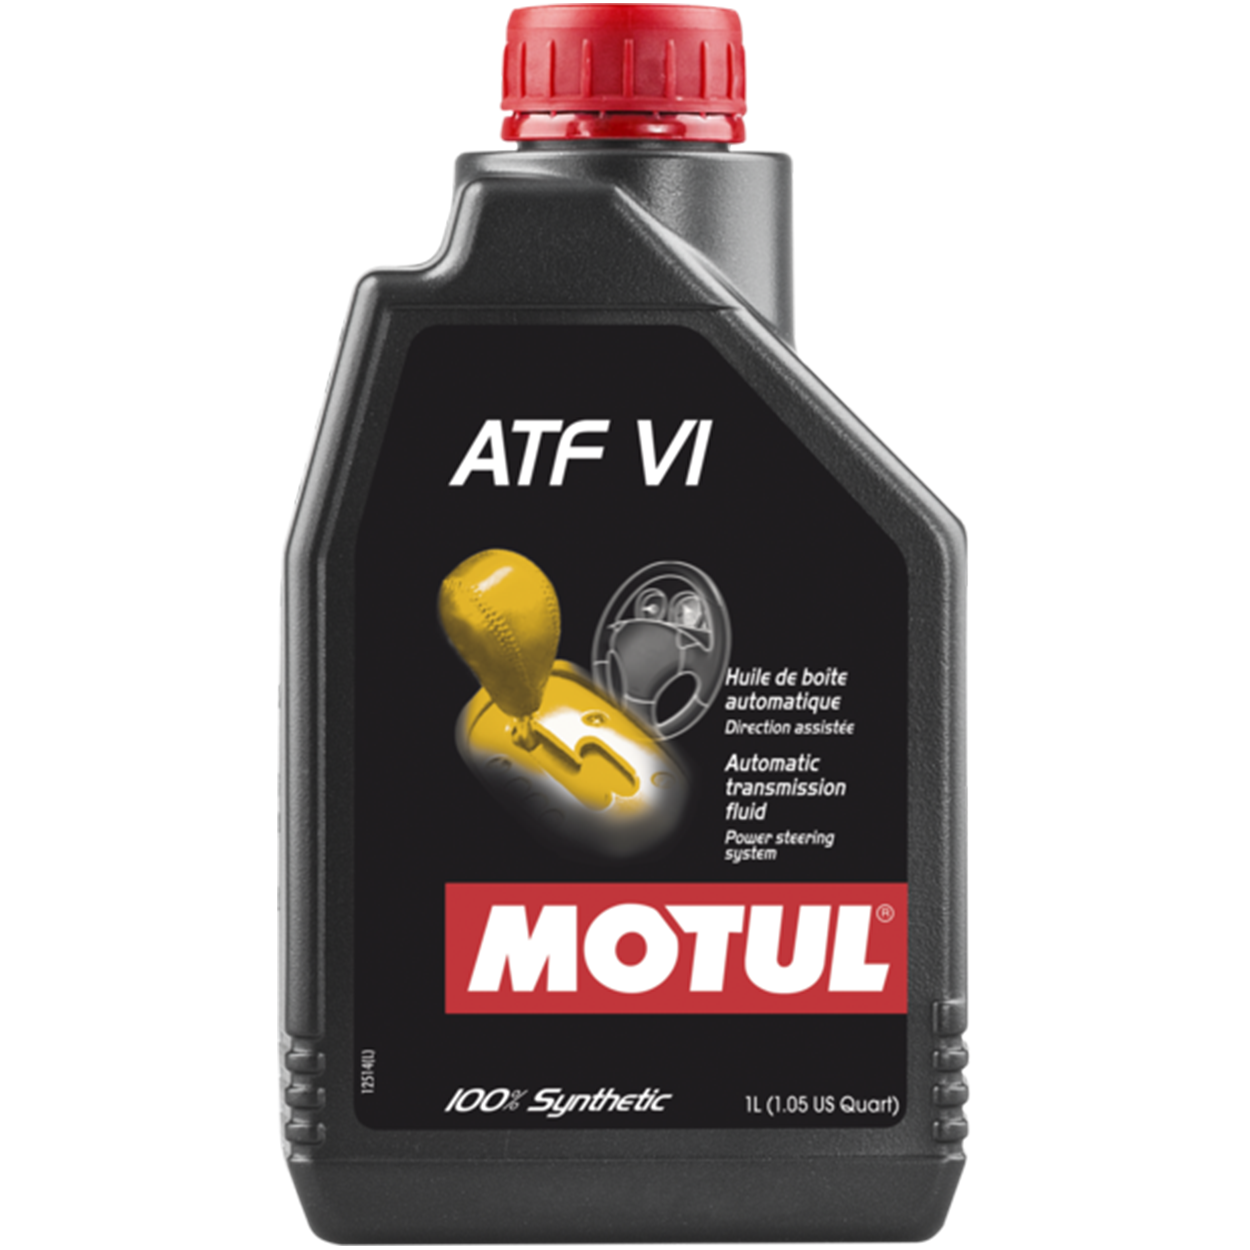 CASE OF 24 QUARTS MOBILE 1 FULL SYNTHETIC LV AUTOMATIC TRANSMISSION FLUID HP